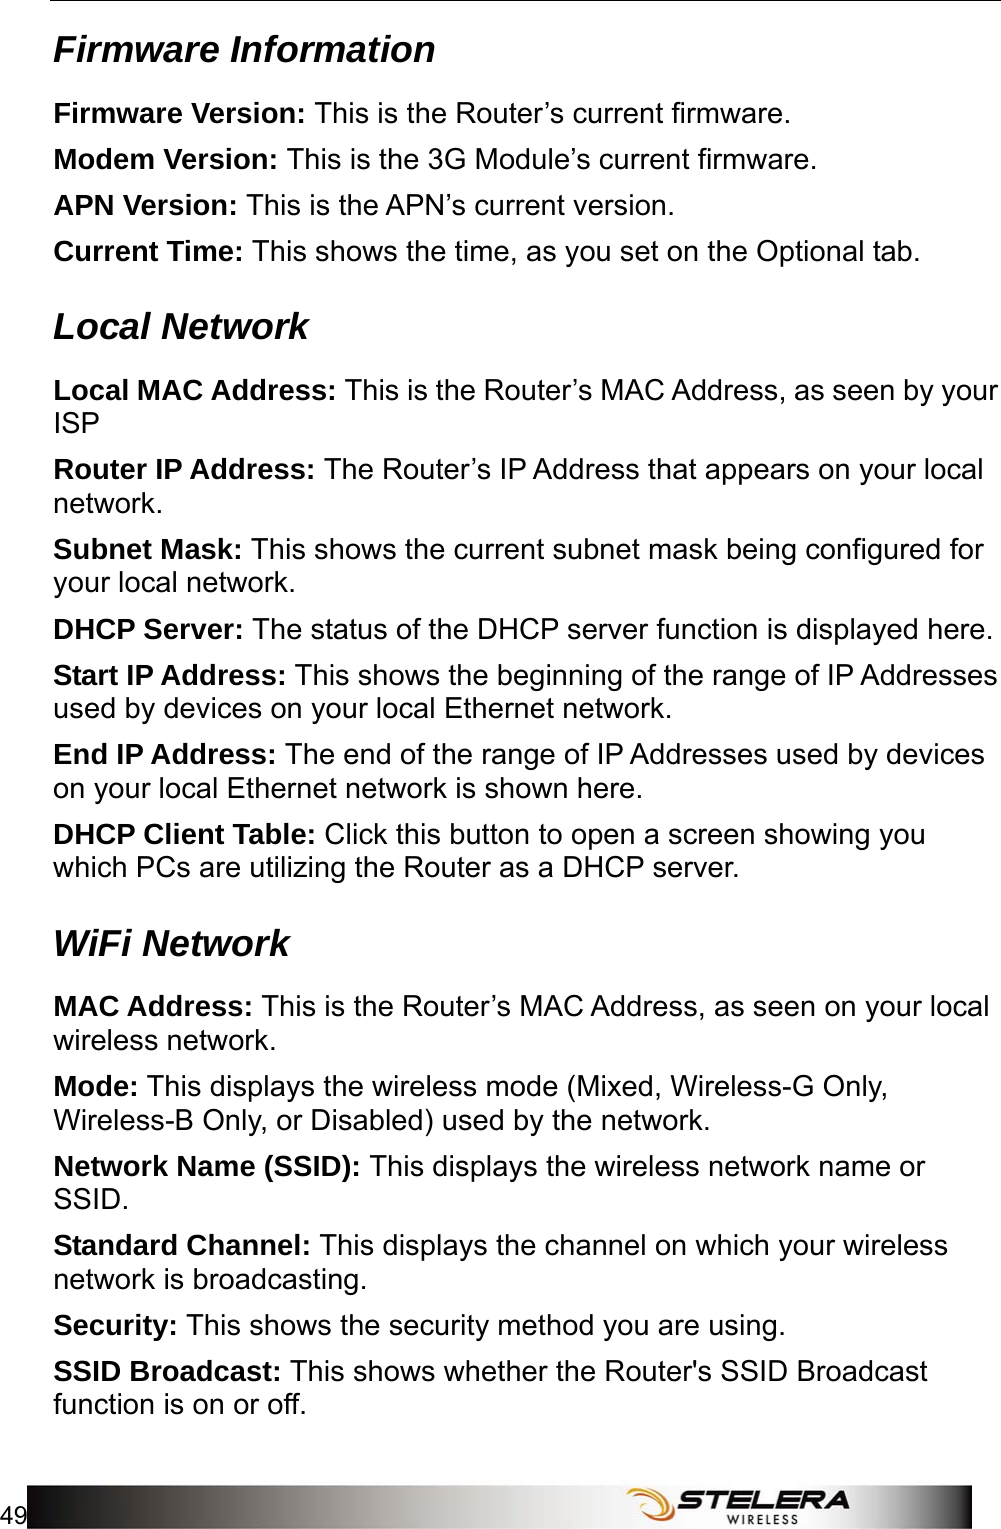  Status 49  Firmware Information Firmware Version: This is the Router’s current firmware. Modem Version: This is the 3G Module’s current firmware. APN Version: This is the APN’s current version. Current Time: This shows the time, as you set on the Optional tab. Local Network Local MAC Address: This is the Router’s MAC Address, as seen by your ISP Router IP Address: The Router’s IP Address that appears on your local network. Subnet Mask: This shows the current subnet mask being configured for your local network. DHCP Server: The status of the DHCP server function is displayed here. Start IP Address: This shows the beginning of the range of IP Addresses used by devices on your local Ethernet network. End IP Address: The end of the range of IP Addresses used by devices on your local Ethernet network is shown here. DHCP Client Table: Click this button to open a screen showing you which PCs are utilizing the Router as a DHCP server.   WiFi Network MAC Address: This is the Router’s MAC Address, as seen on your local wireless network. Mode: This displays the wireless mode (Mixed, Wireless-G Only, Wireless-B Only, or Disabled) used by the network. Network Name (SSID): This displays the wireless network name or SSID. Standard Channel: This displays the channel on which your wireless network is broadcasting. Security: This shows the security method you are using. SSID Broadcast: This shows whether the Router&apos;s SSID Broadcast function is on or off.  